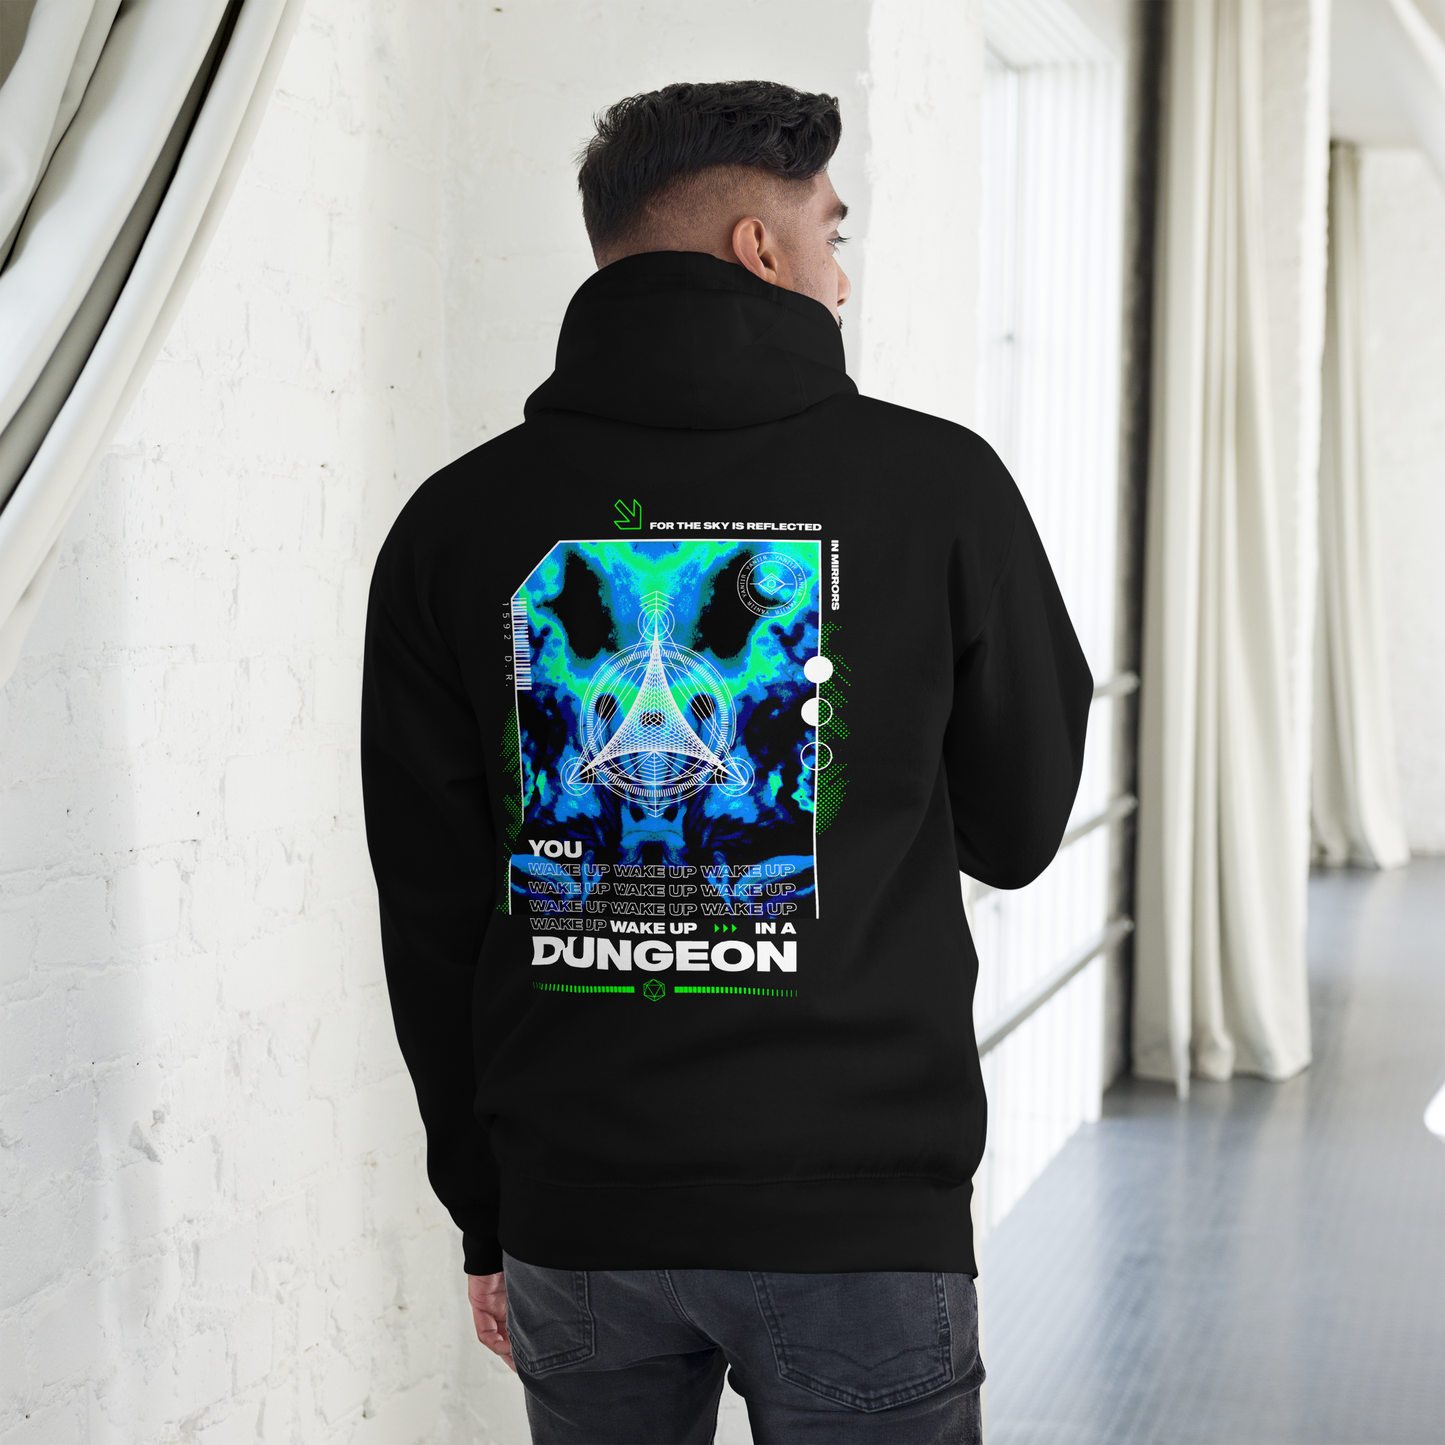 In a Dungeon || Hoodie